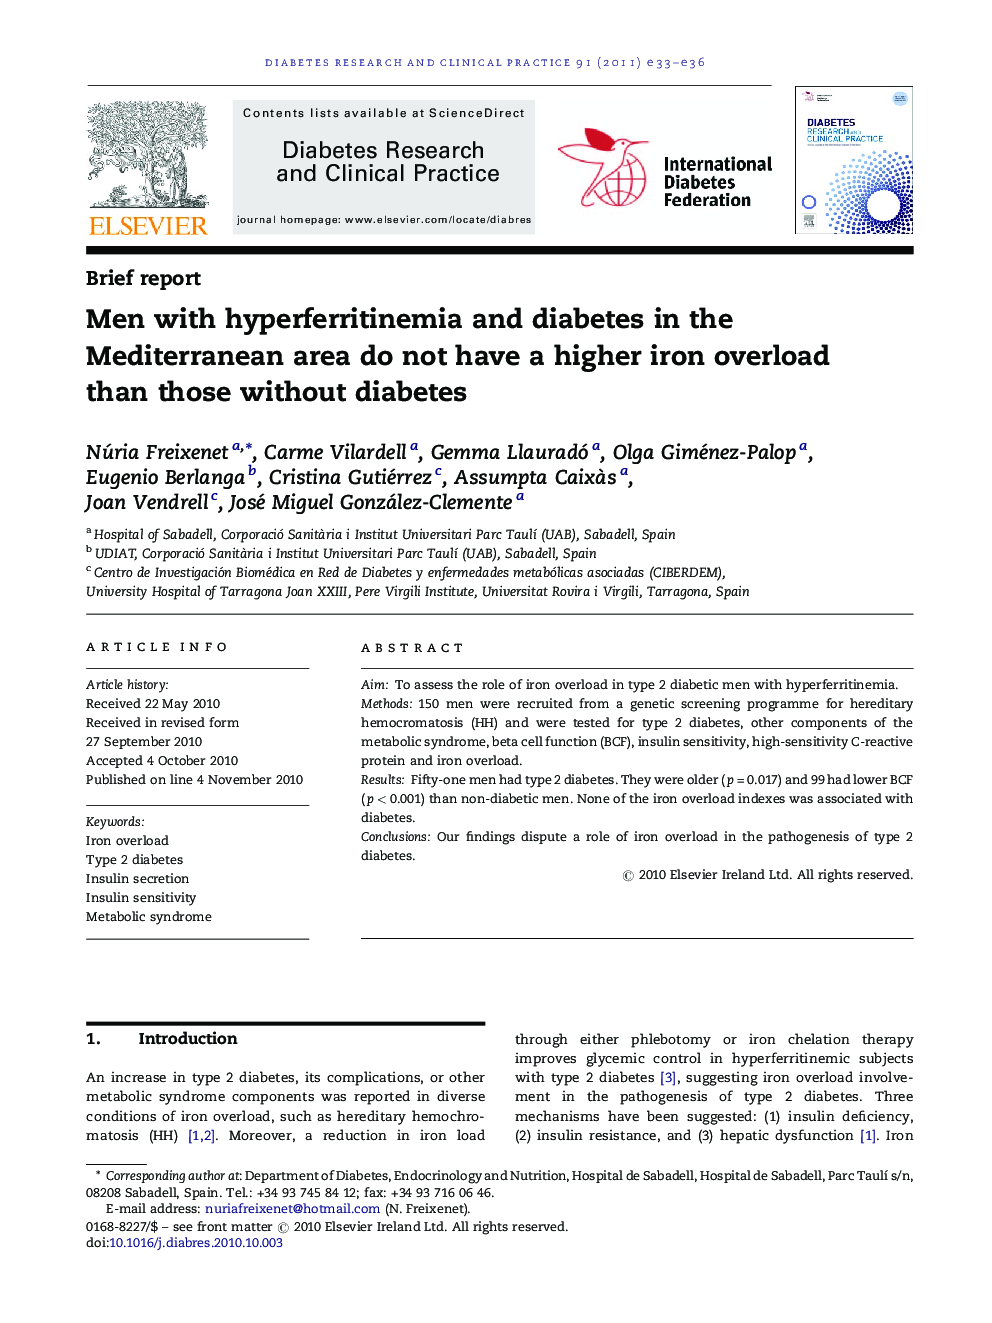 Men with hyperferritinemia and diabetes in the Mediterranean area do not have a higher iron overload than those without diabetes